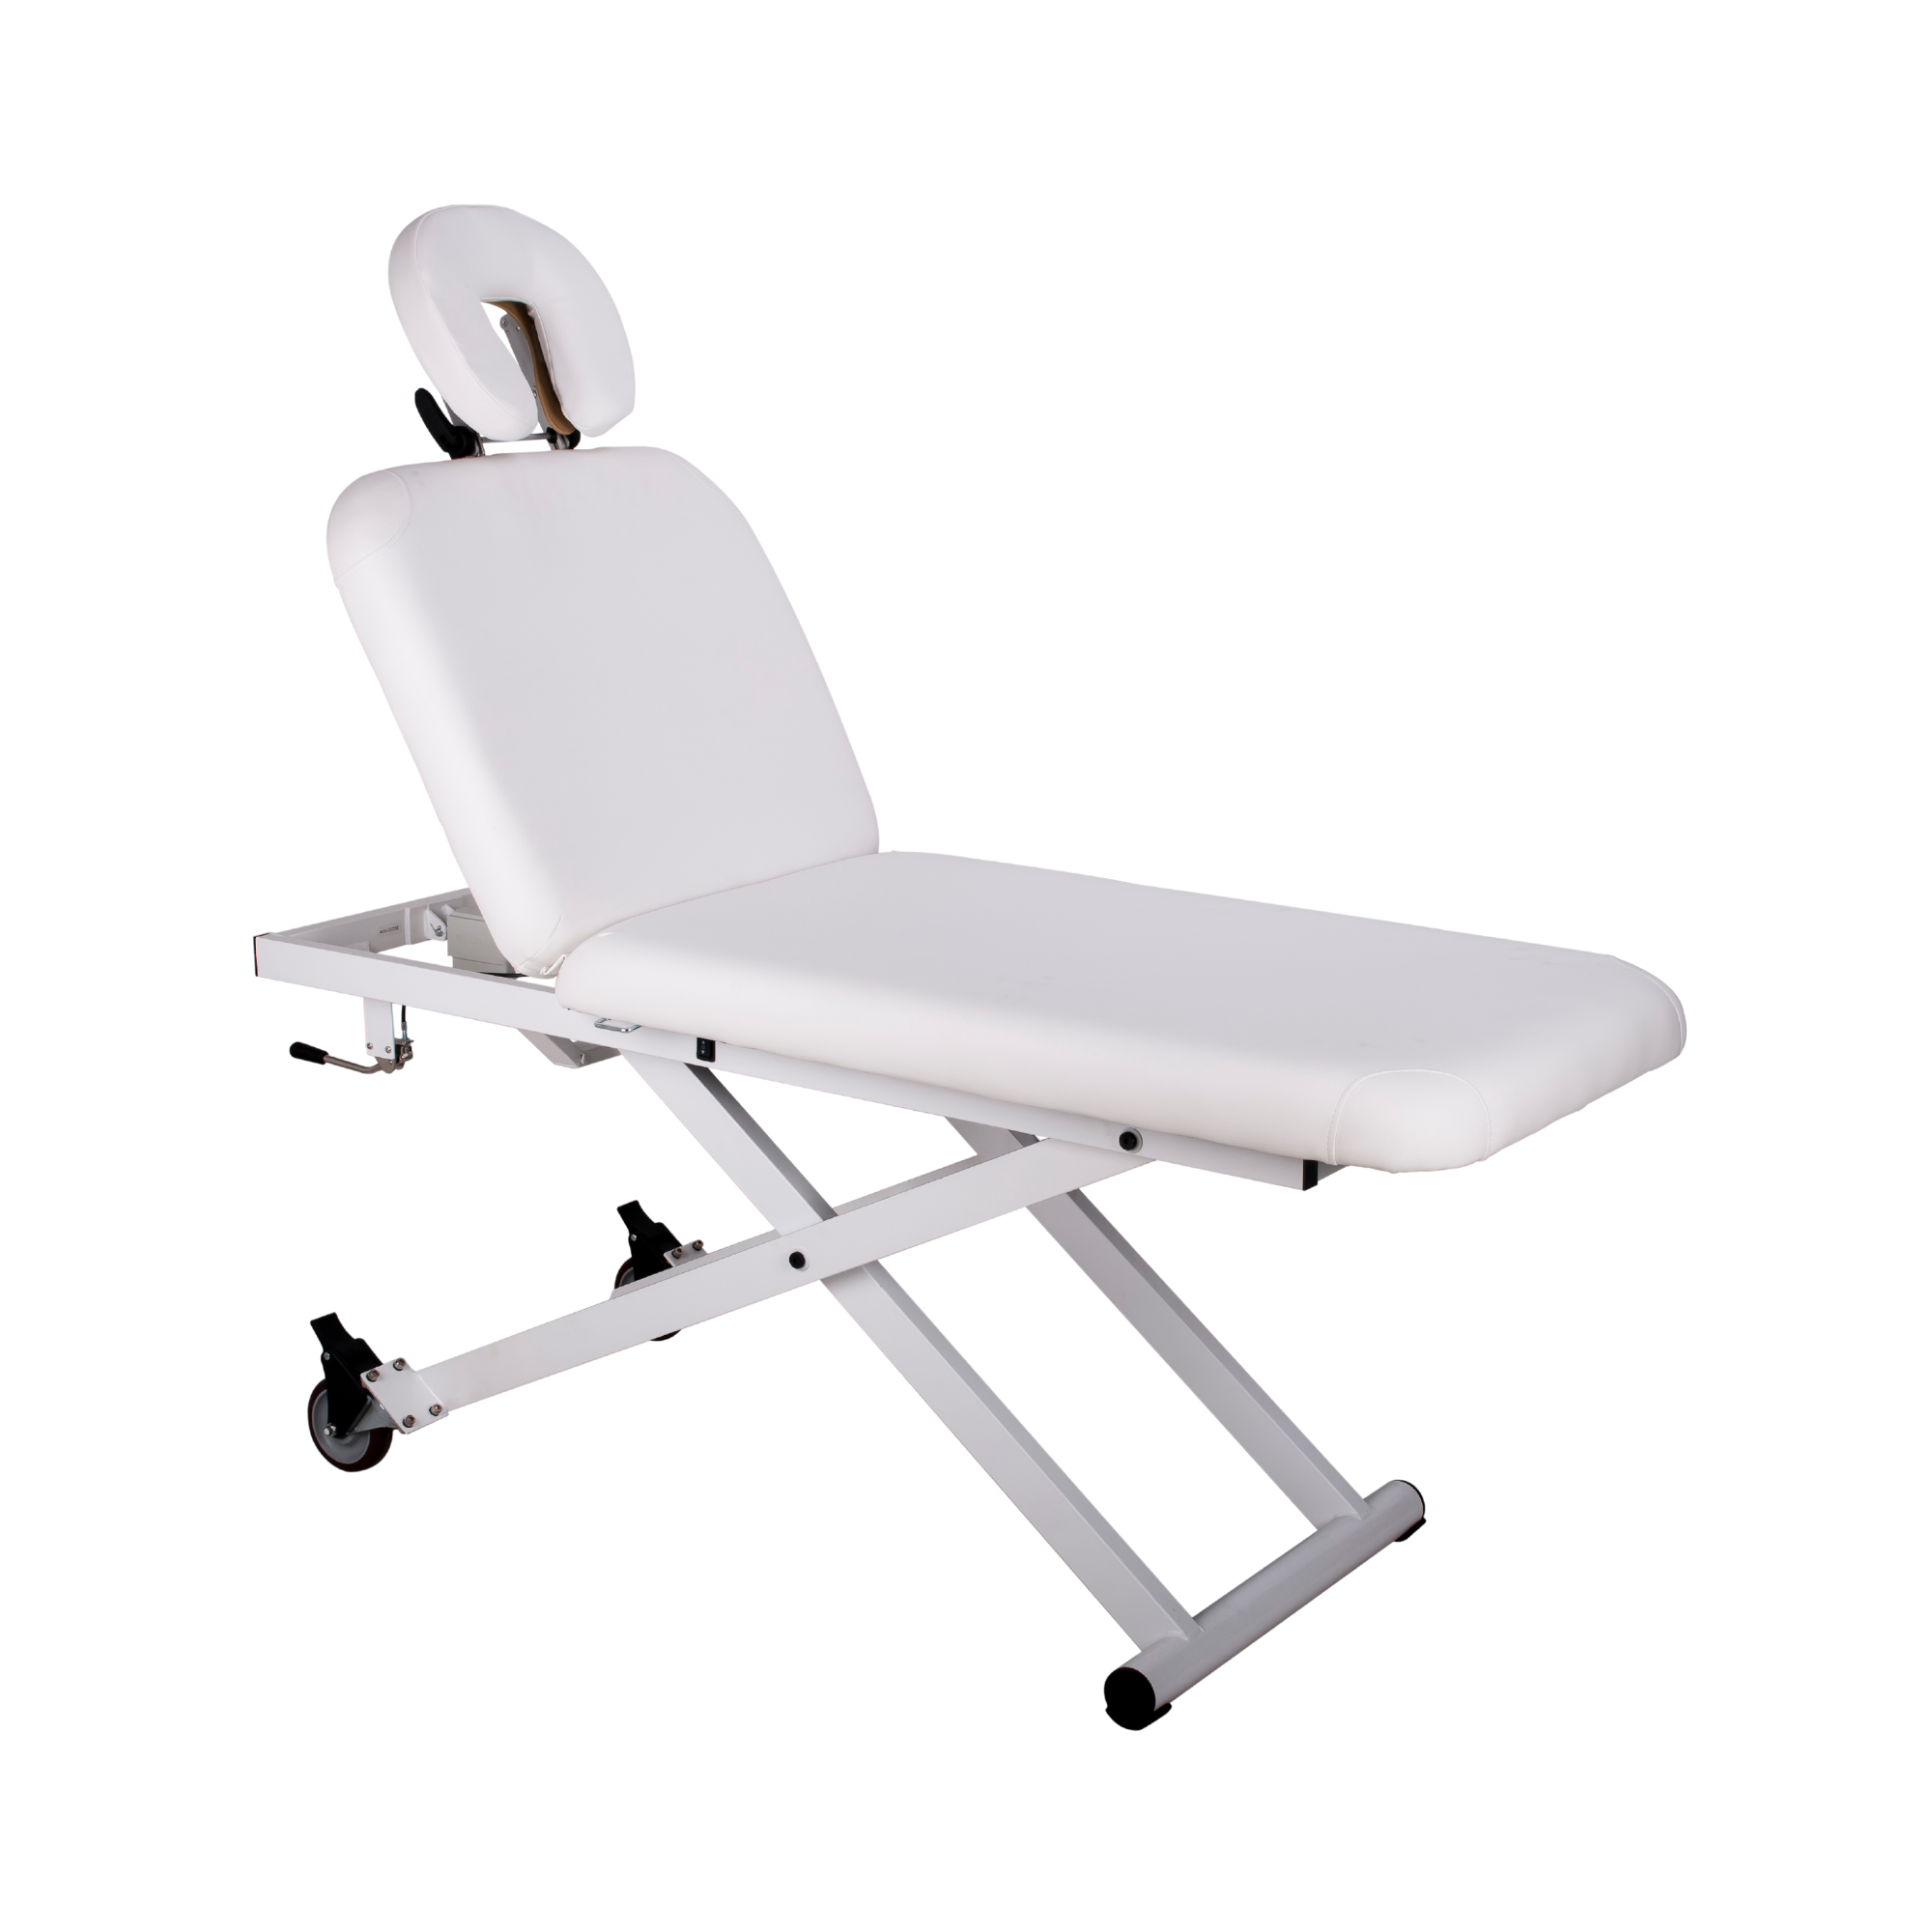 2210A Electric Massage Table with Adjustable Headrest and Wheels